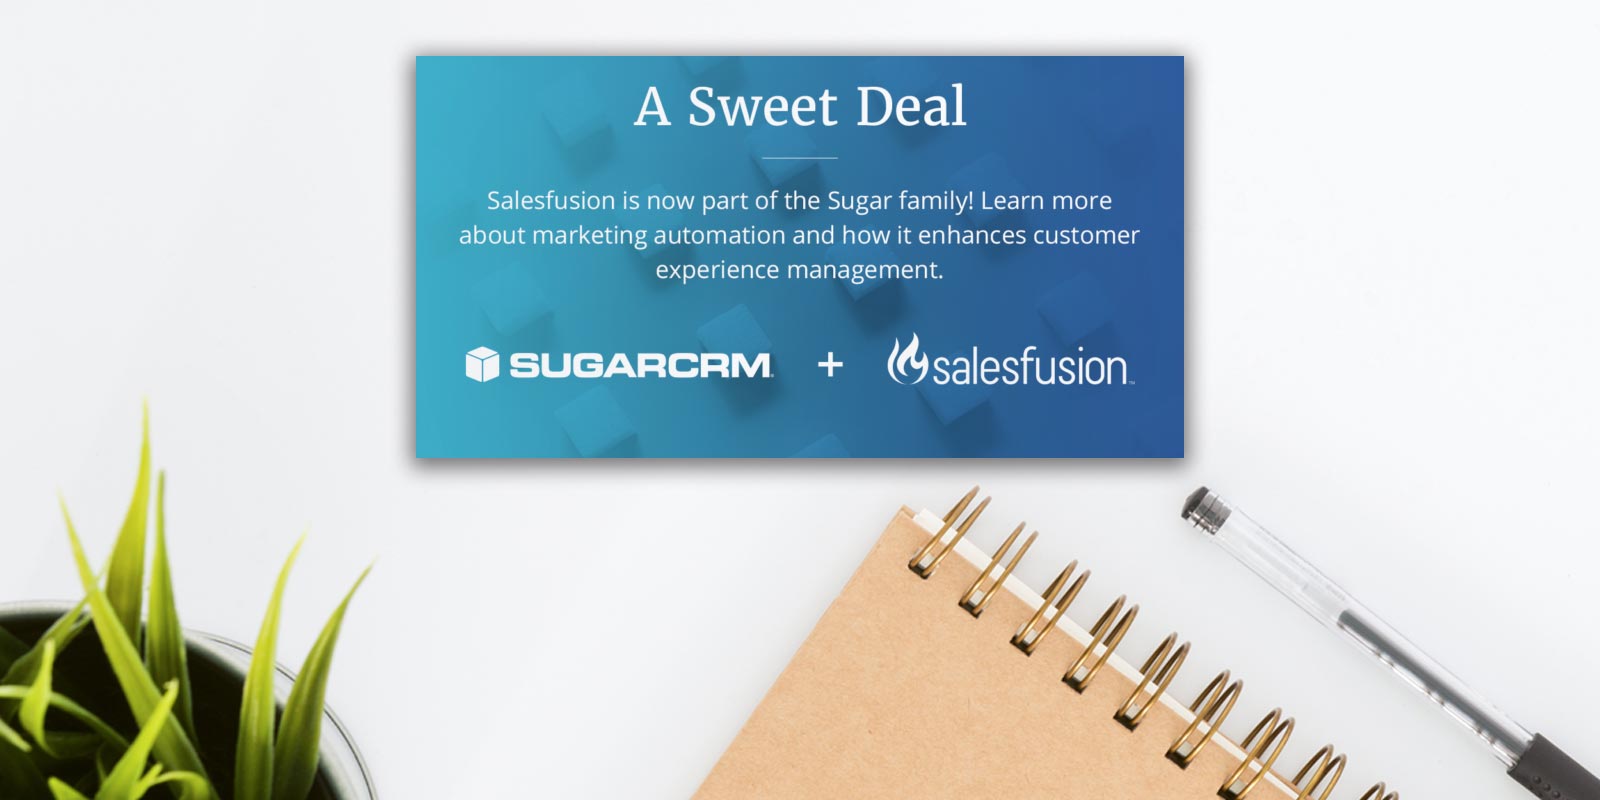 SugarCRM Acquires Salesfusion: Key Takeaways and What It Means!